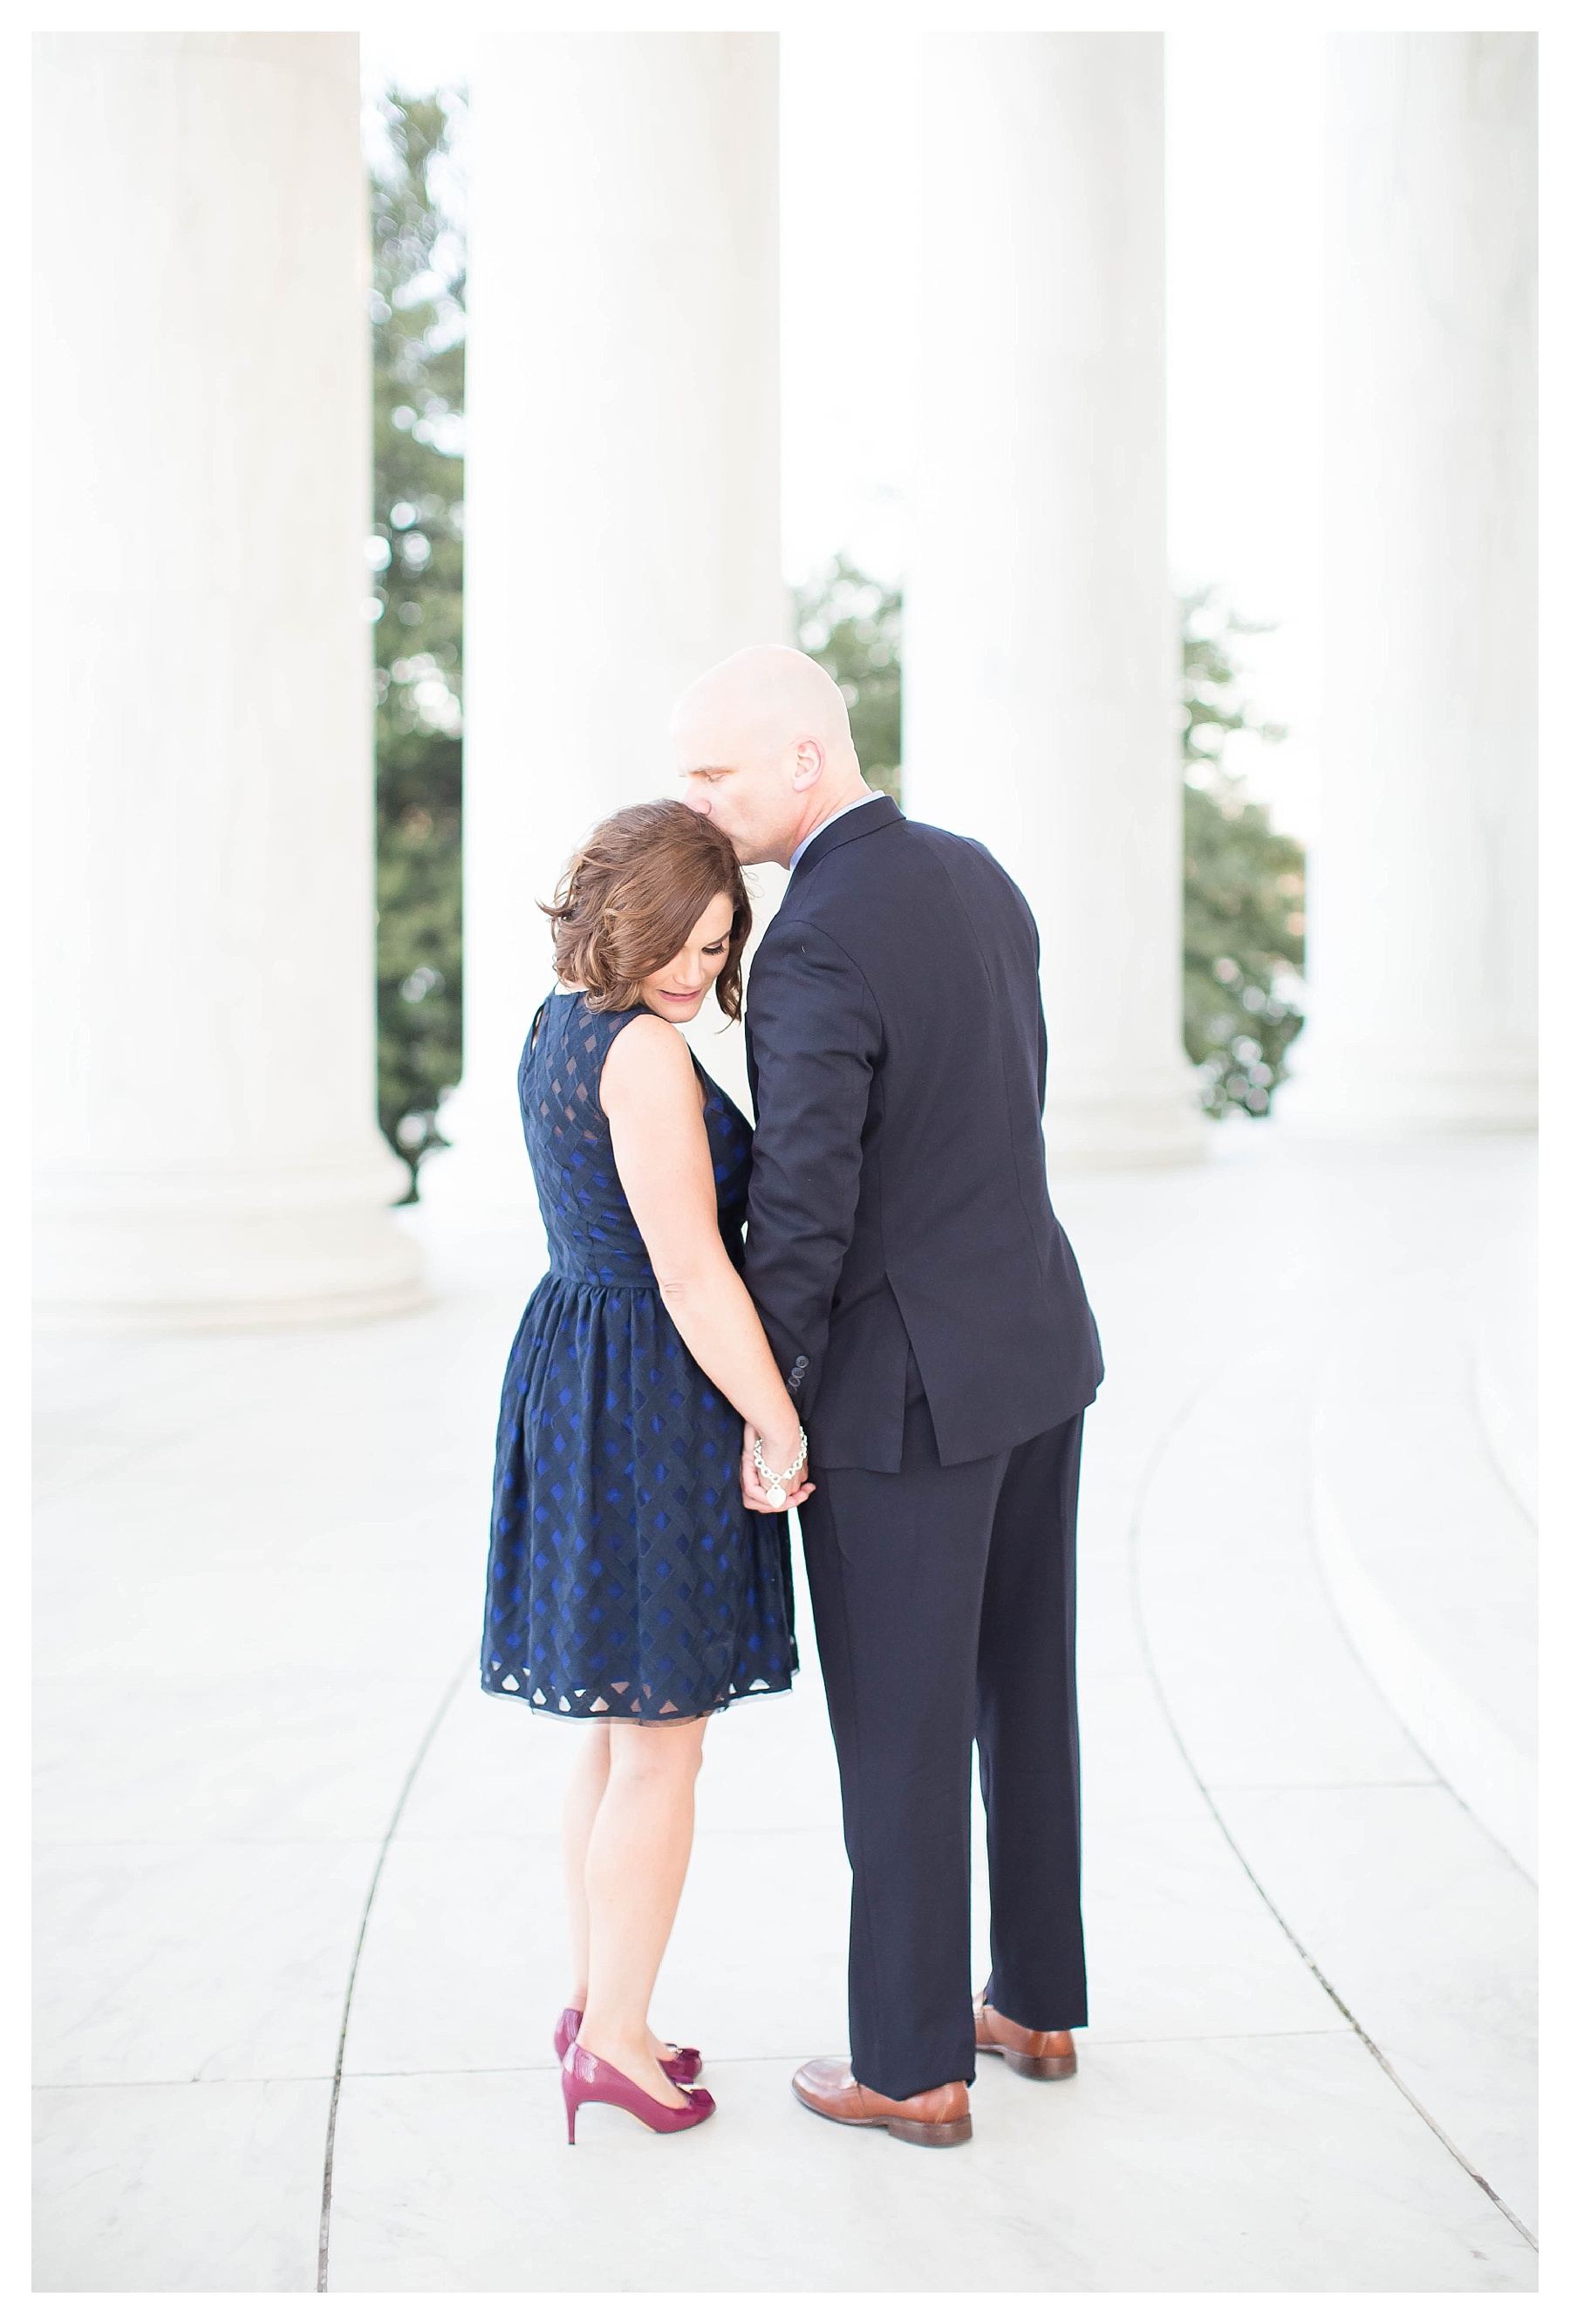 Candice Adelle Photography DC Destination Wedding Photographer Cherry Blossom Engagment Session_0046.jpg